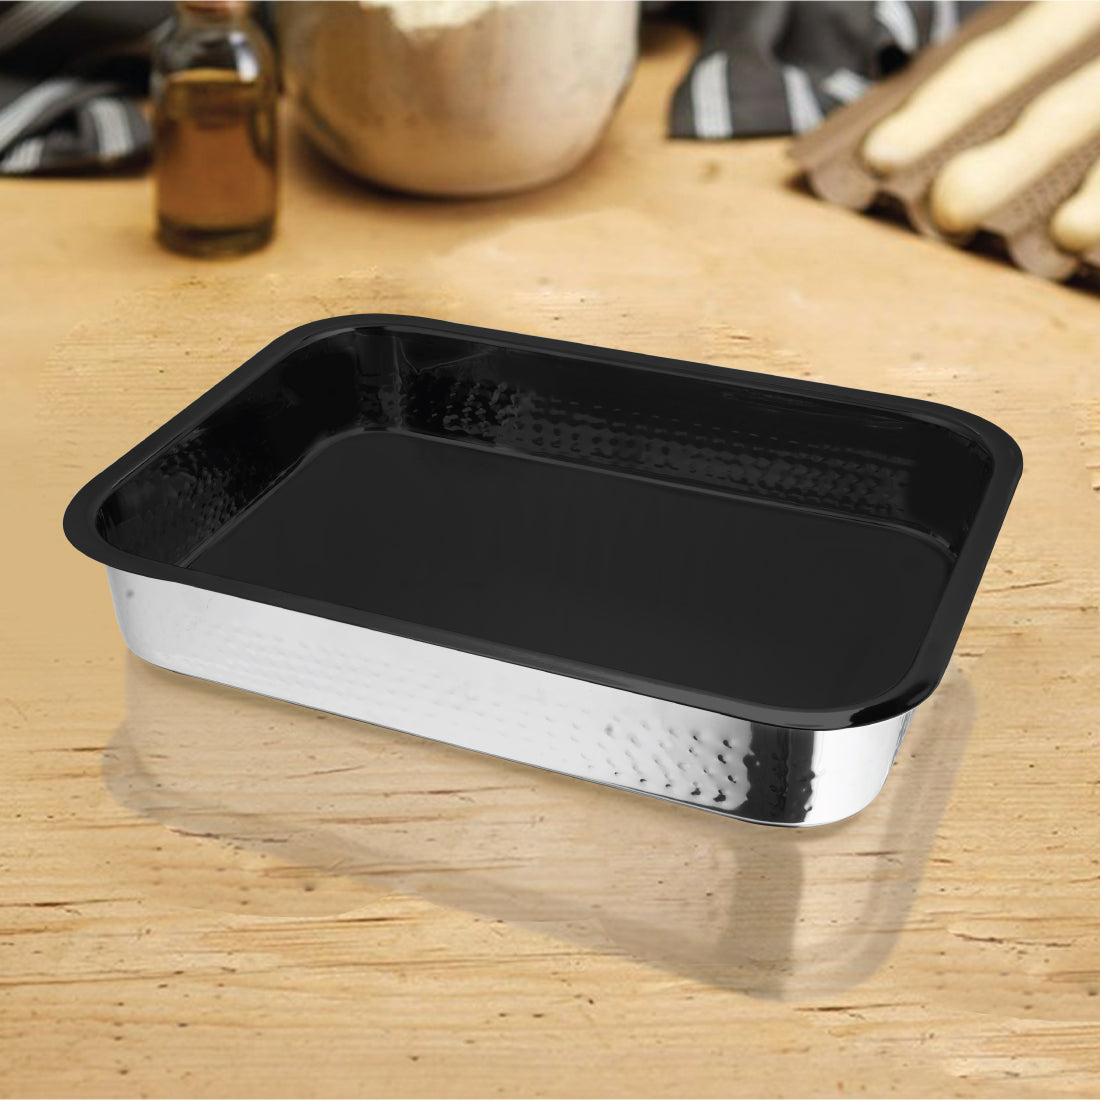 Stainless Steel Hammered Rectangular Baking Tray with Black Coating